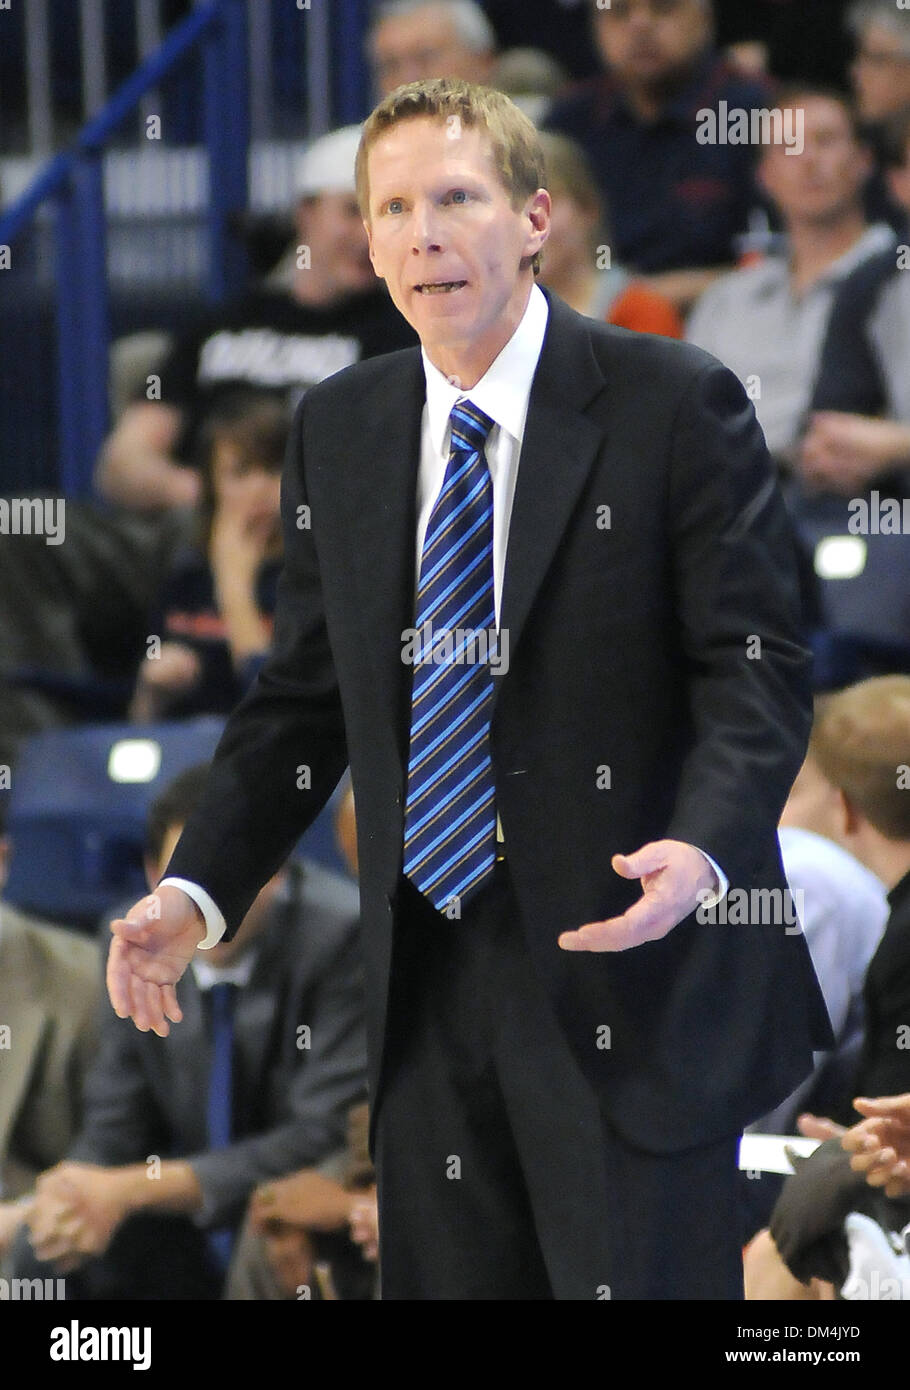 Gonzaga head coach Mark Few looks on during a NCAA college basketball game  against Loyola Marymount held at the McCarthey Athletic Center in Spokane  WA. Gonzaga would go onto win the game